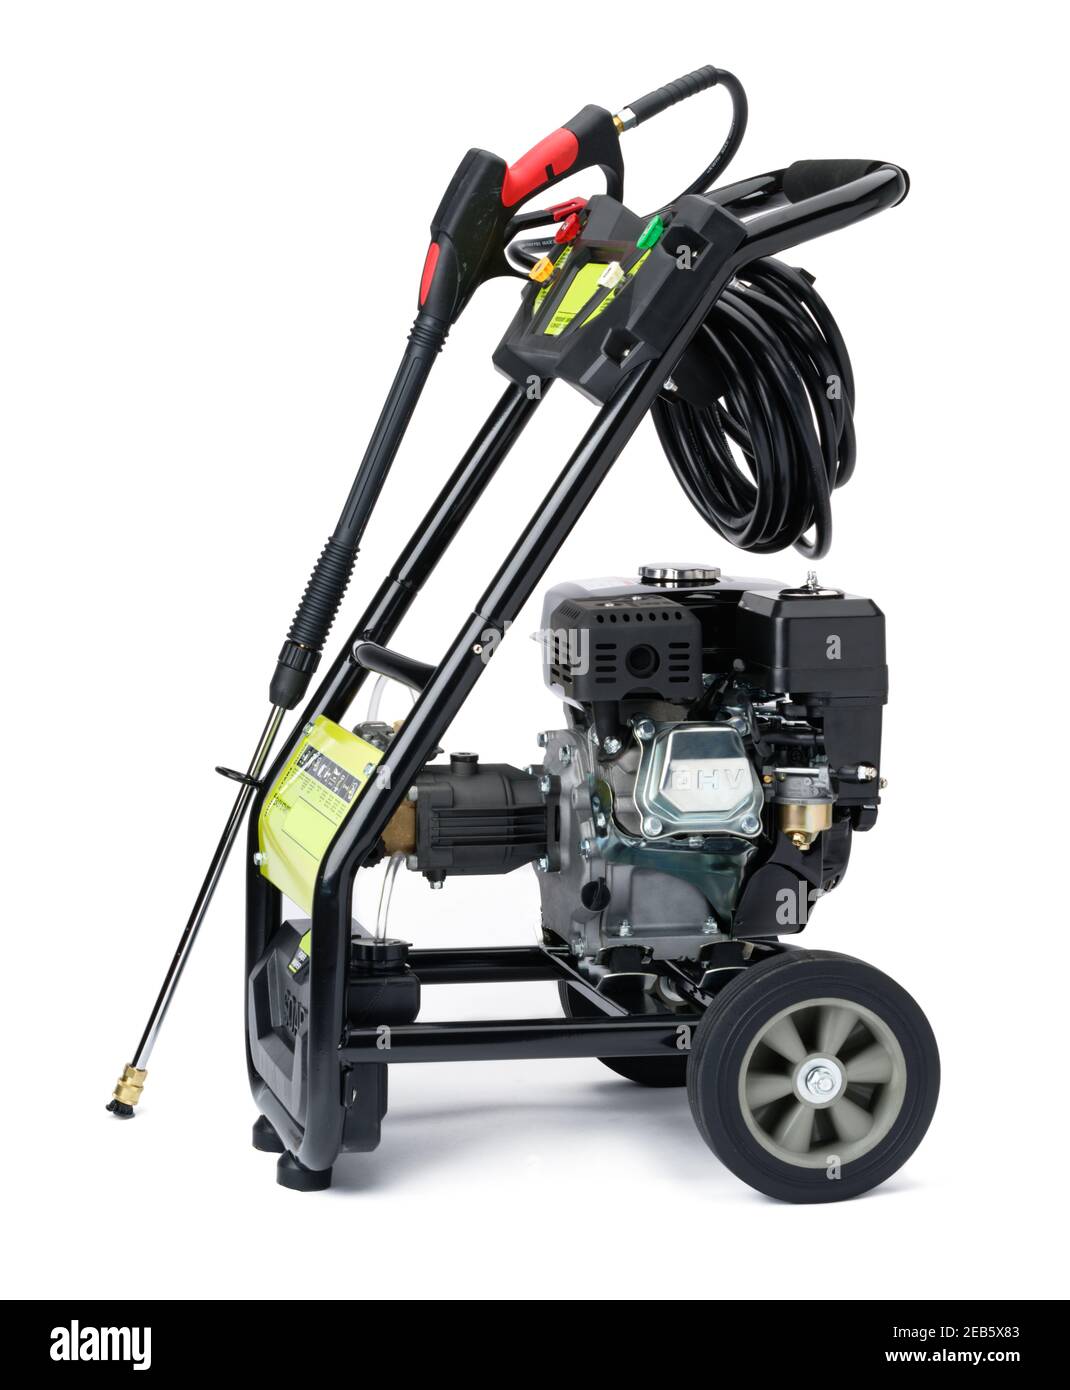 Petrol engined pressure washer. Water pumped through a powerful engine to make a strong jet for cleaning outdoor surfaces. Cars, patios, boats etc. Stock Photo